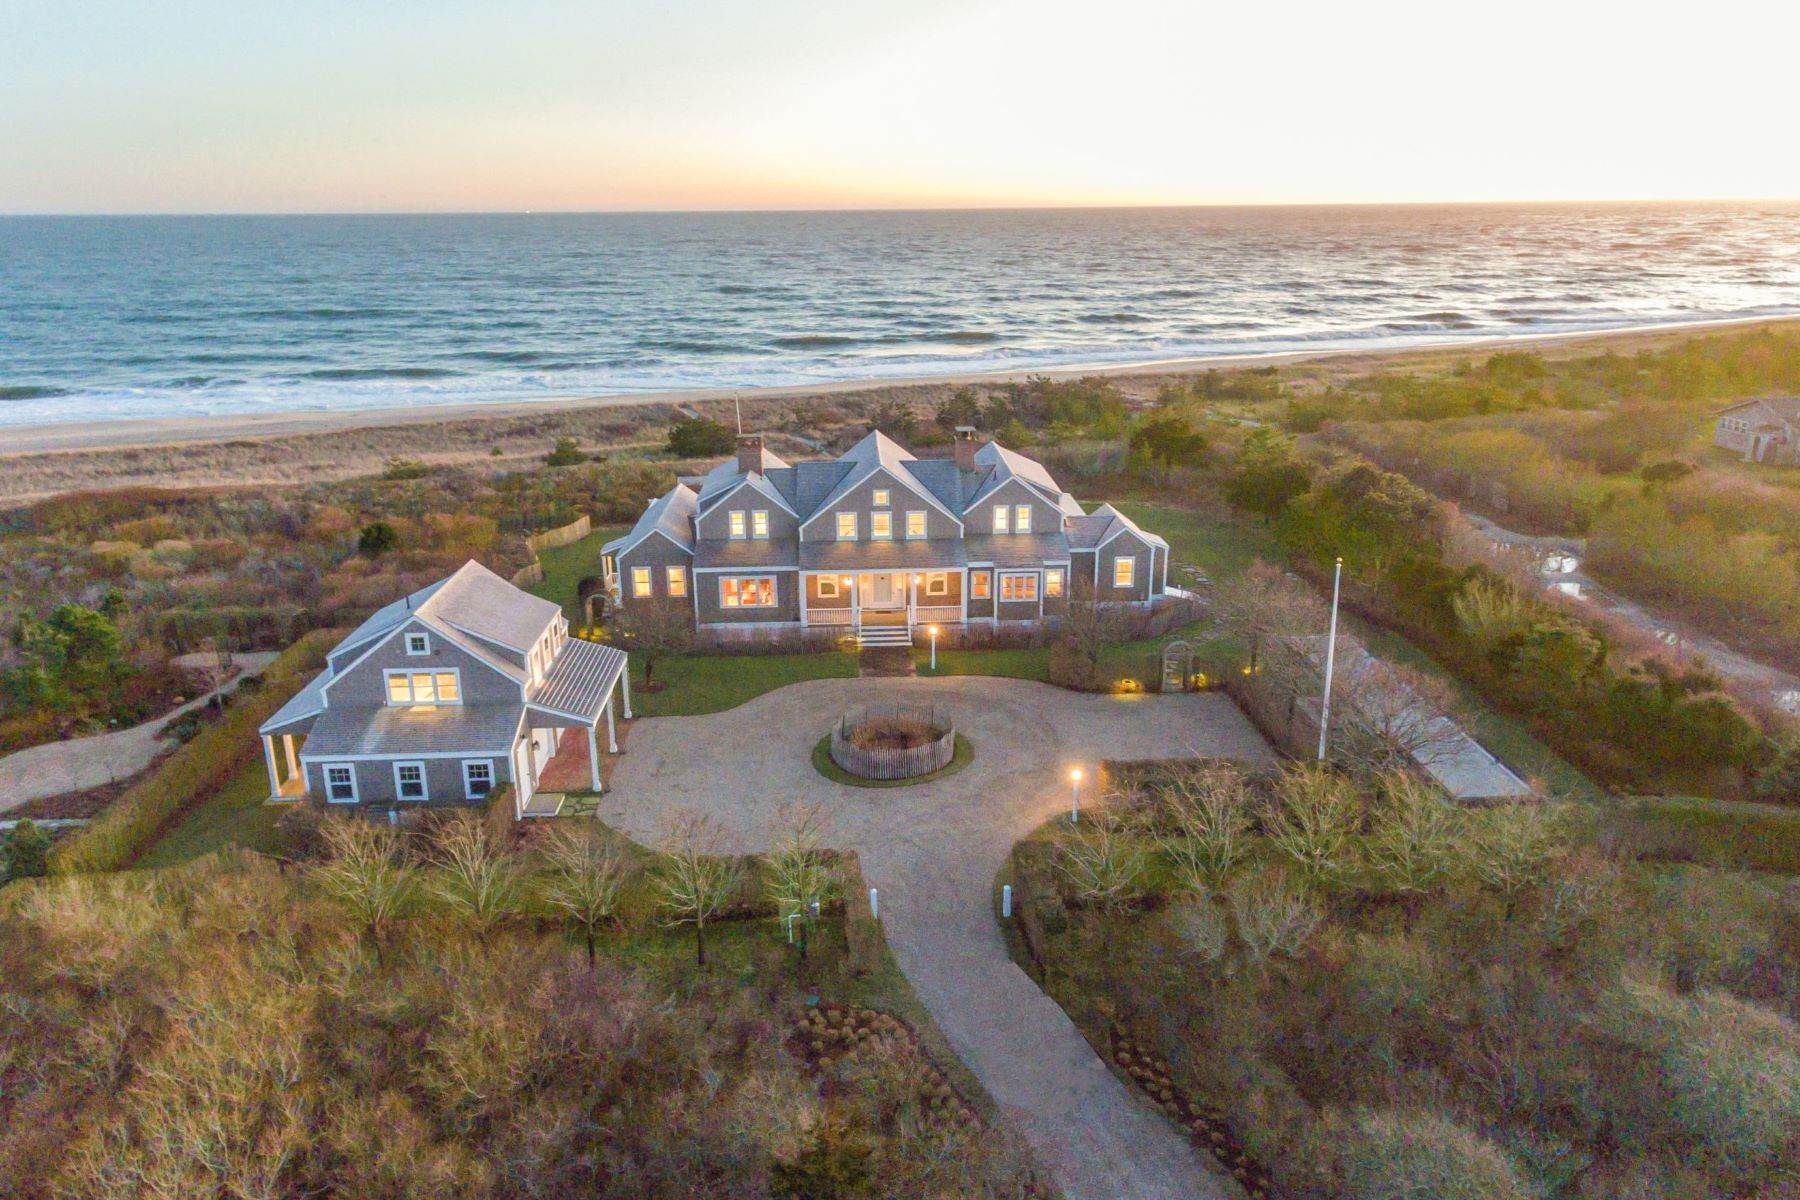 Single Family Homes for Sale at Pinnacle of Luxury Living 25 Nonantum Avenue Nantucket, Massachusetts 02554 United States